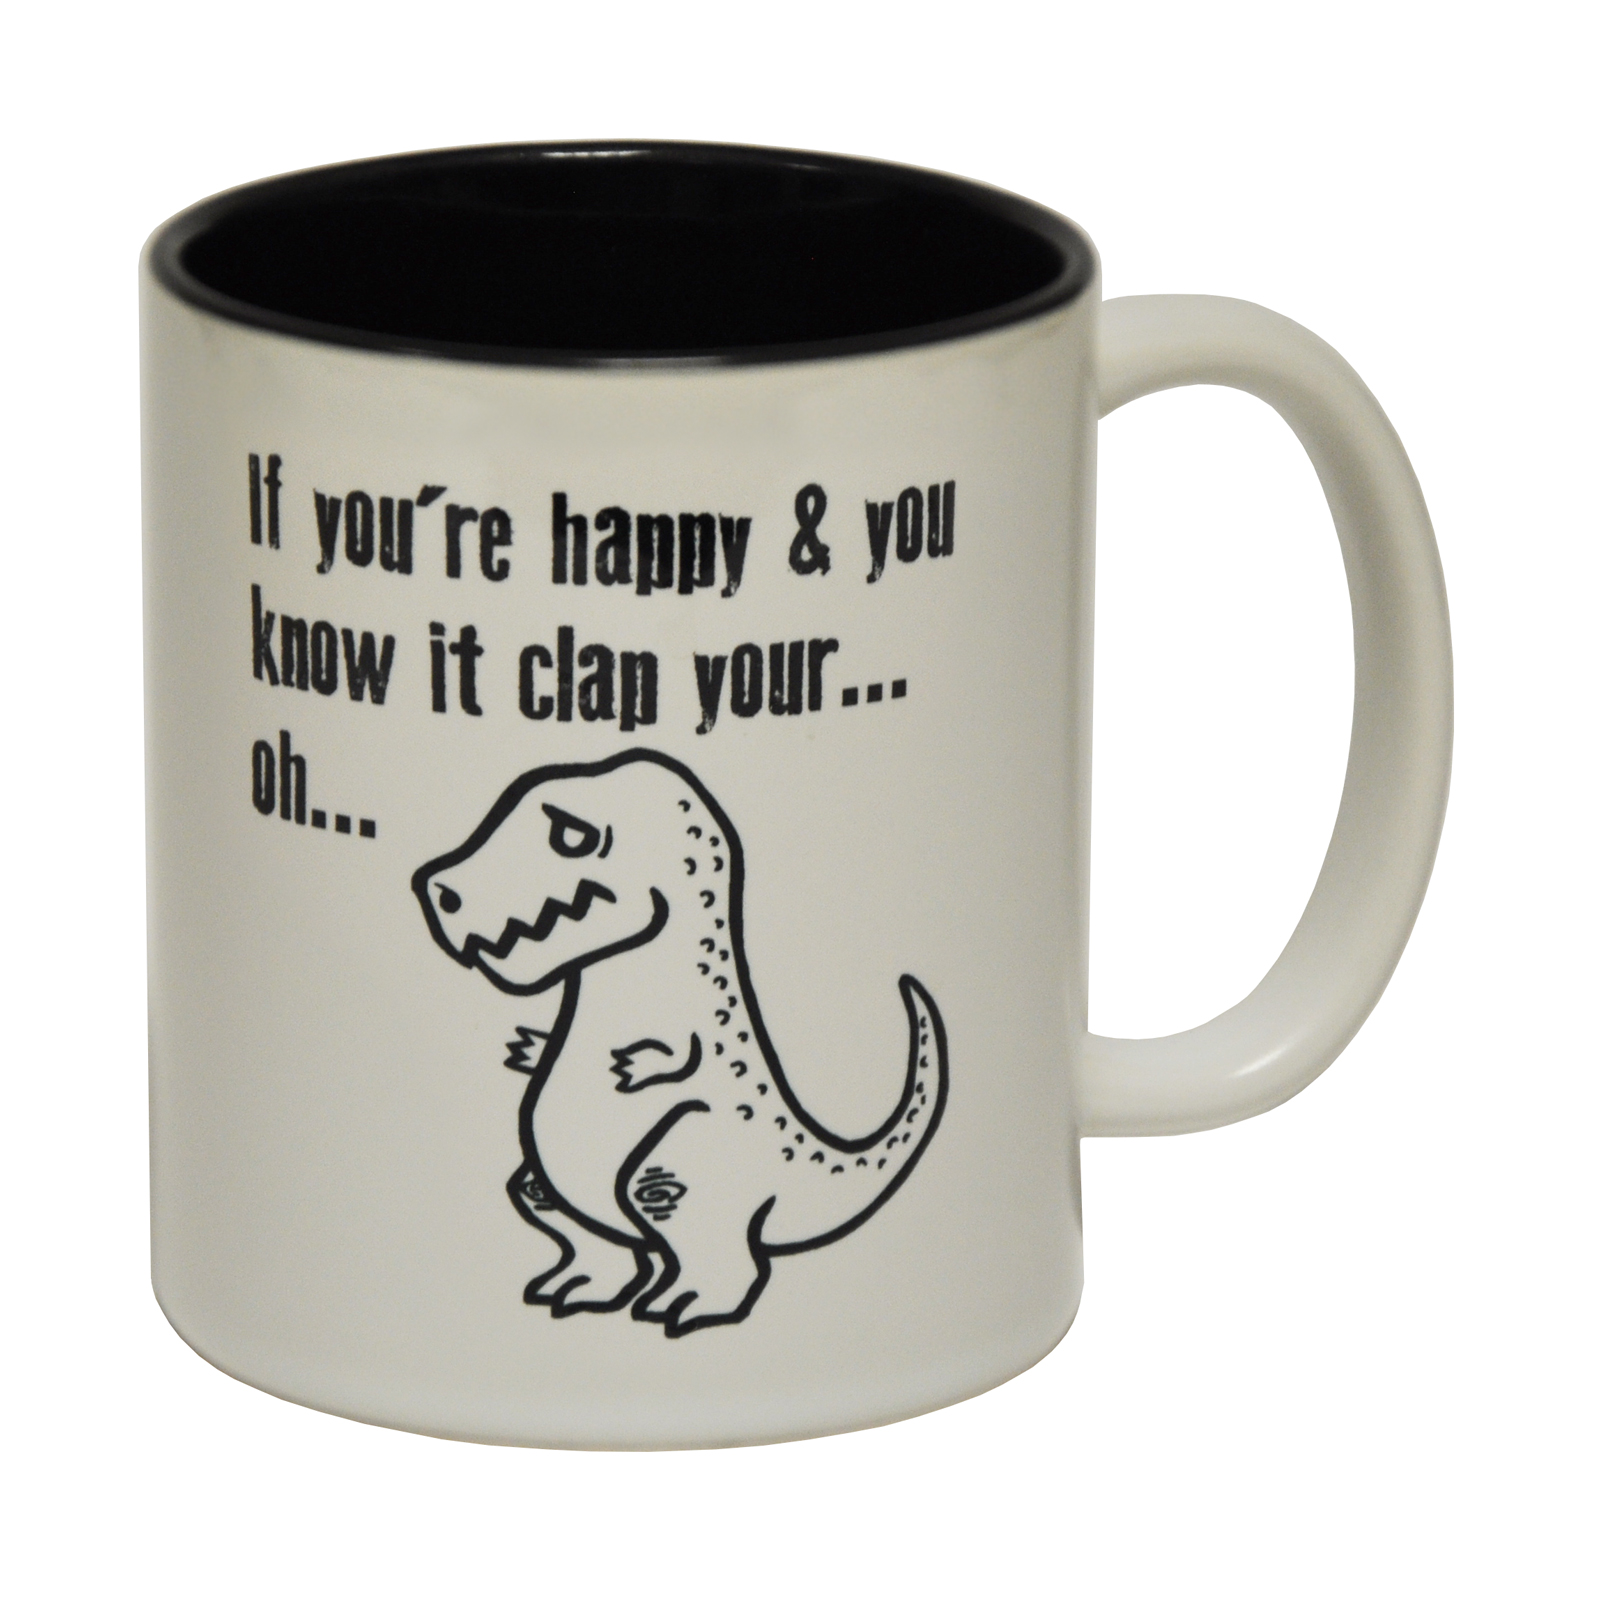 Funny Mugs If Your Happy And You Know It Clap Your Oh Dinosaur NOVELTY MUG 